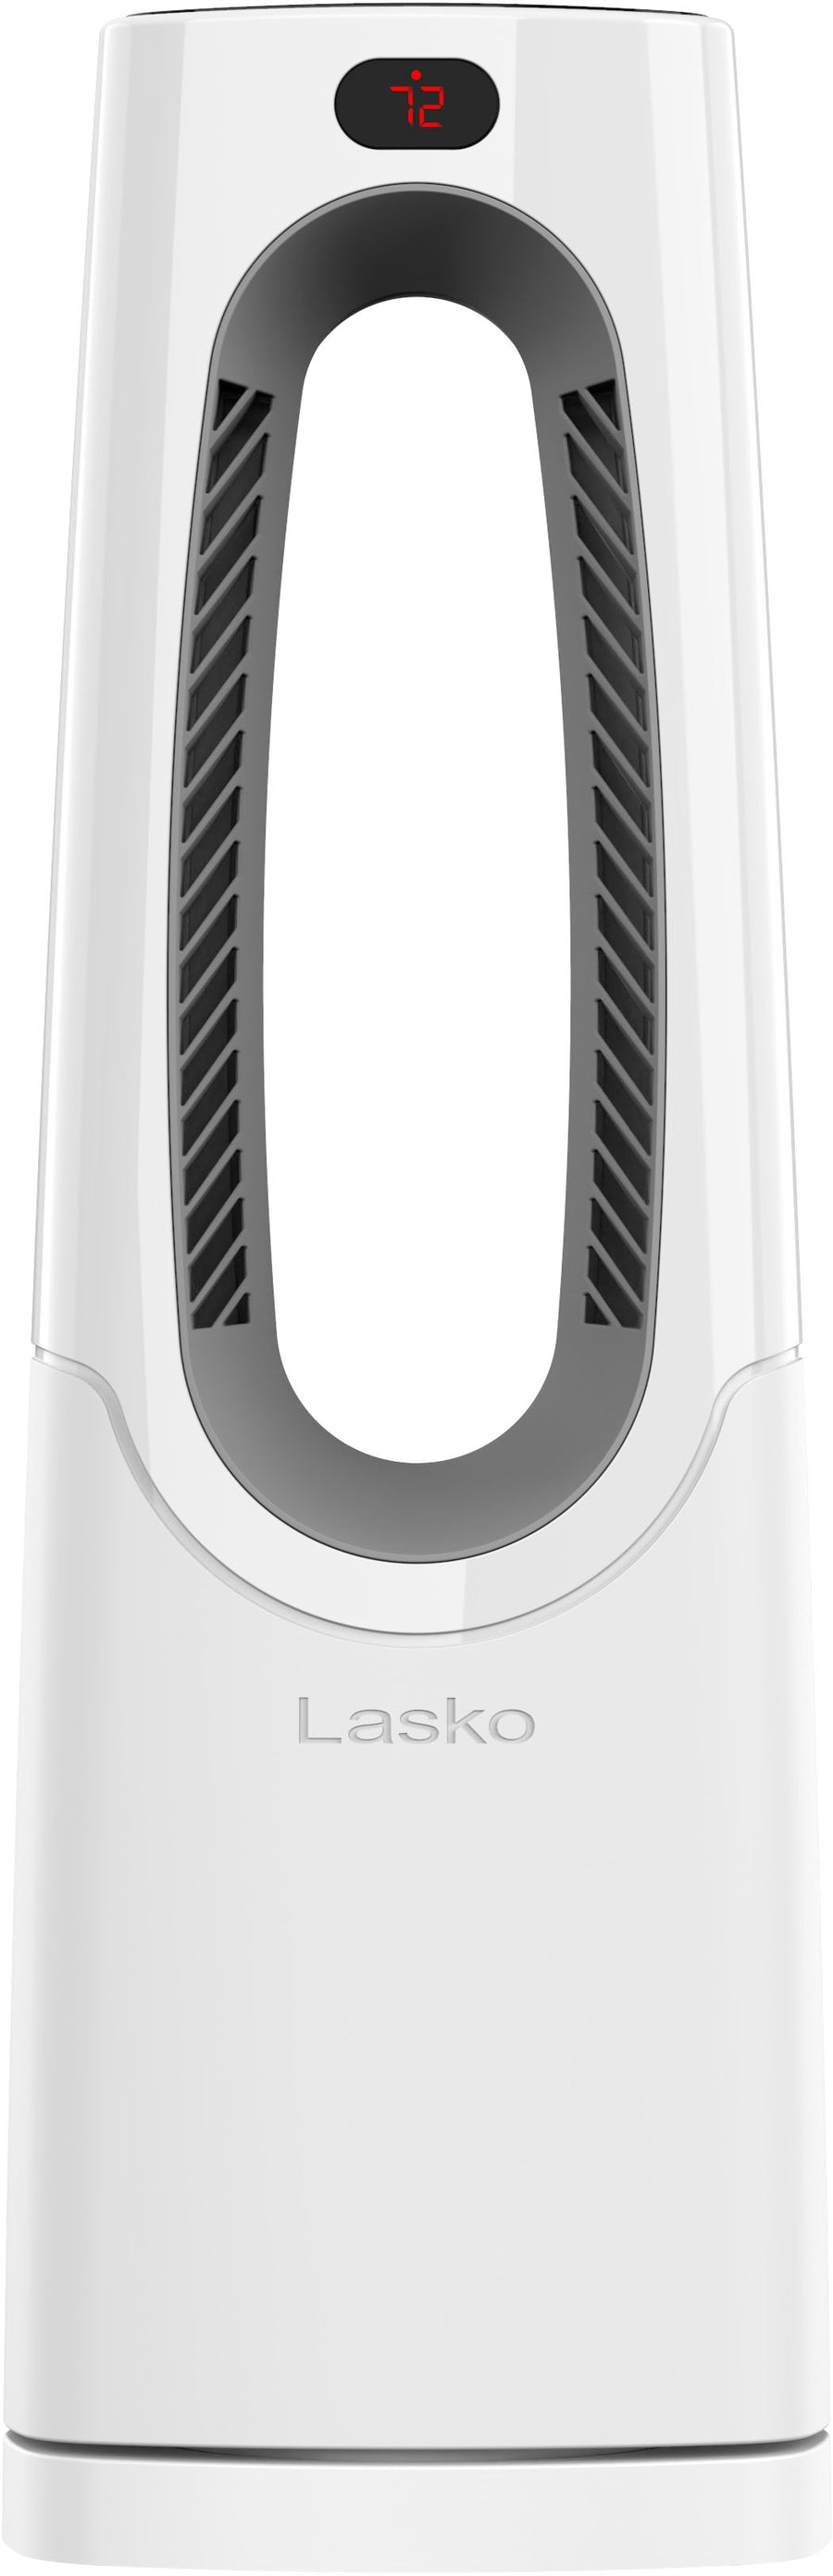 Lasko - 1500-Watt Bladeless Ceramic Tower Space Heater with Timer and Remote Control - White_0